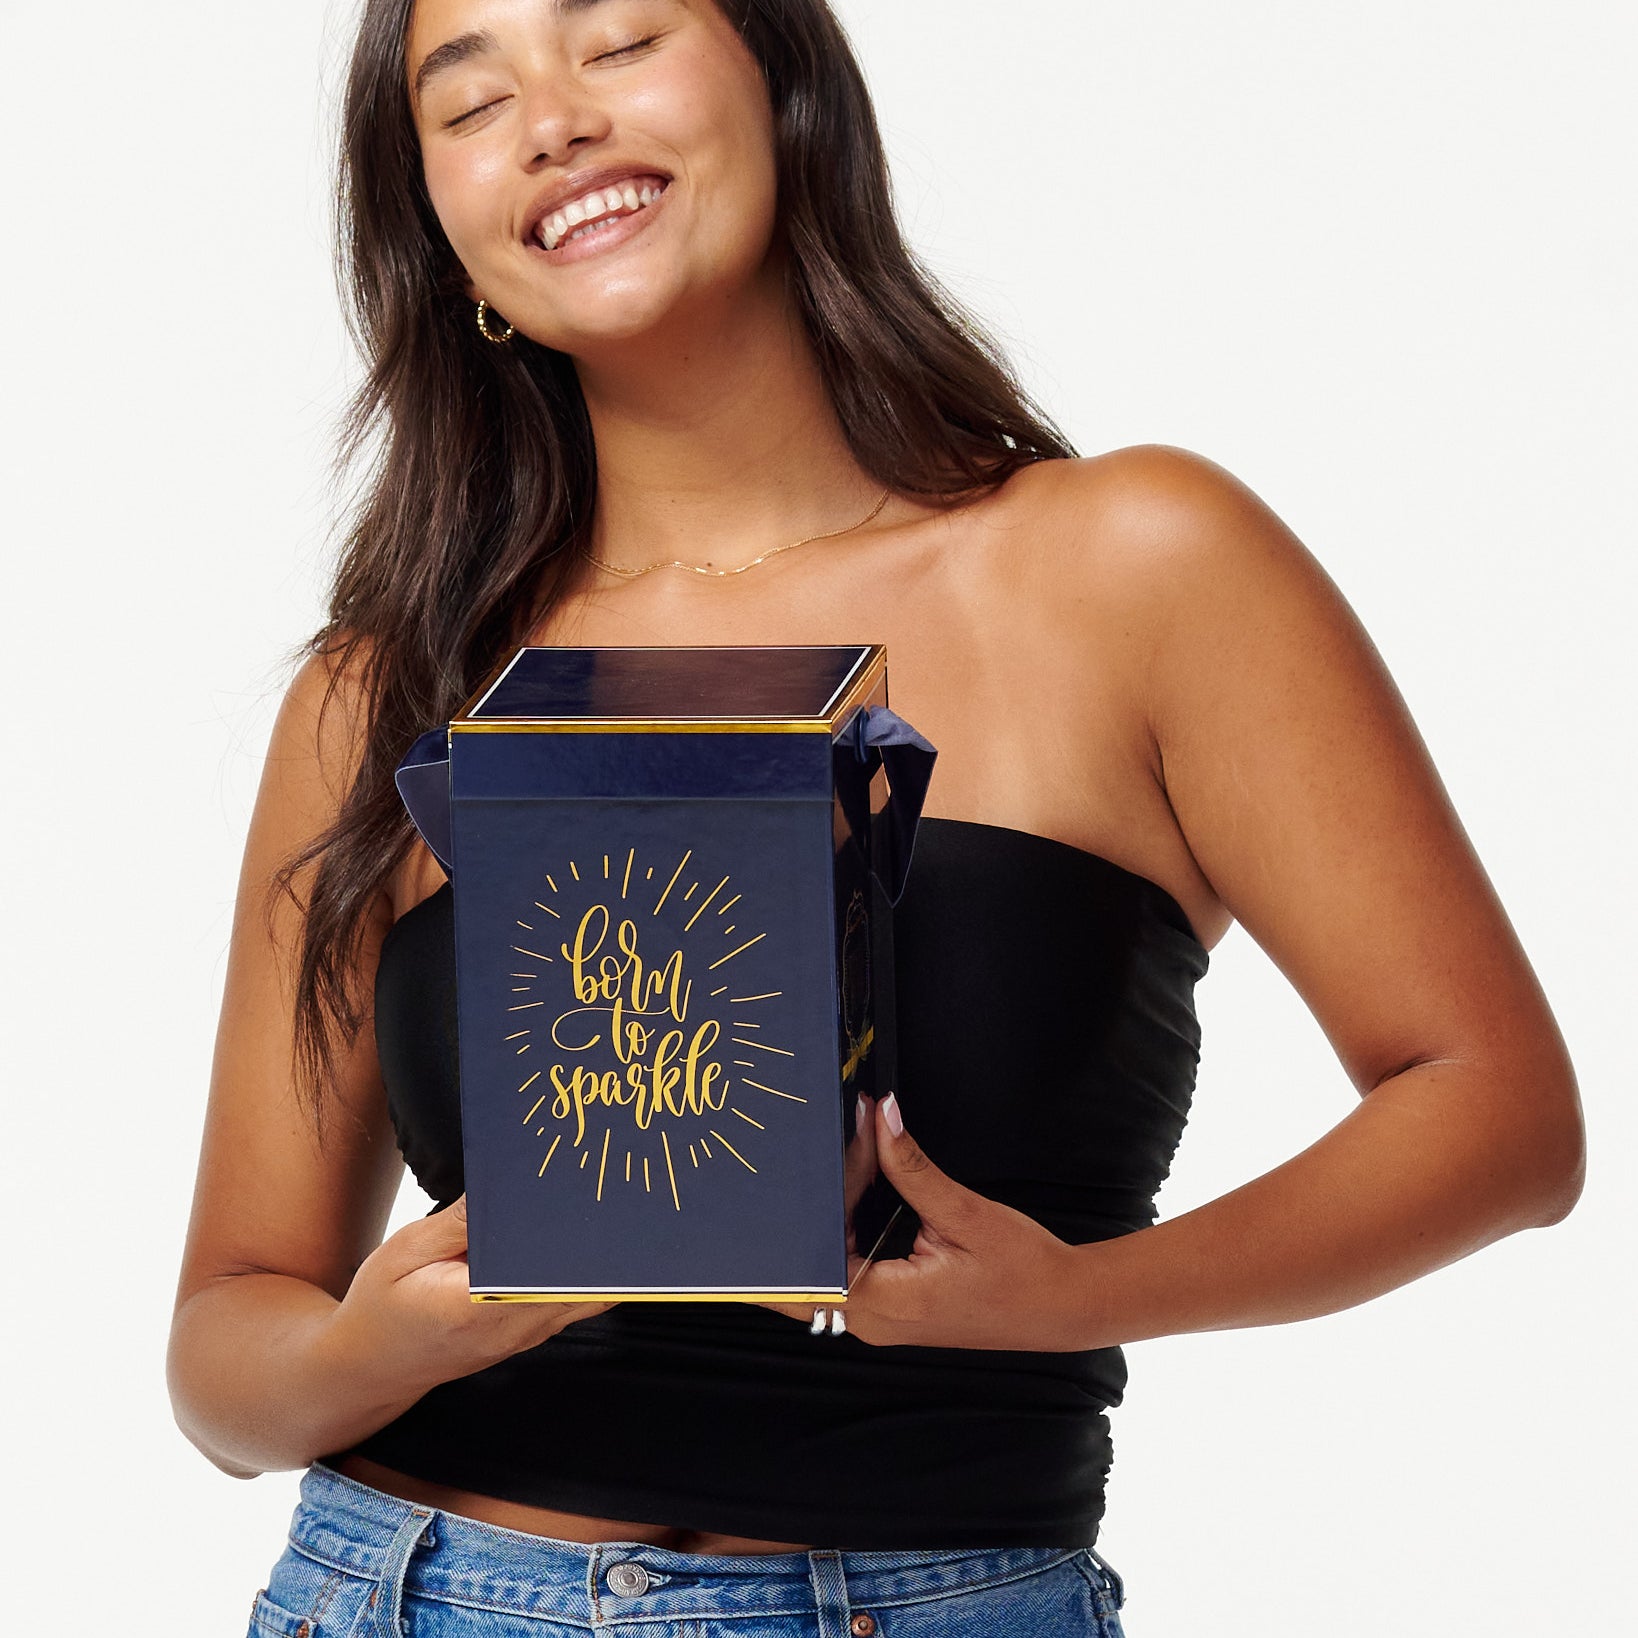 A smiling woman in a black top and jeans holds a blue box with the words "Born to Sparkle" in gold. She looks joyfully to the side, appearing content and playful.